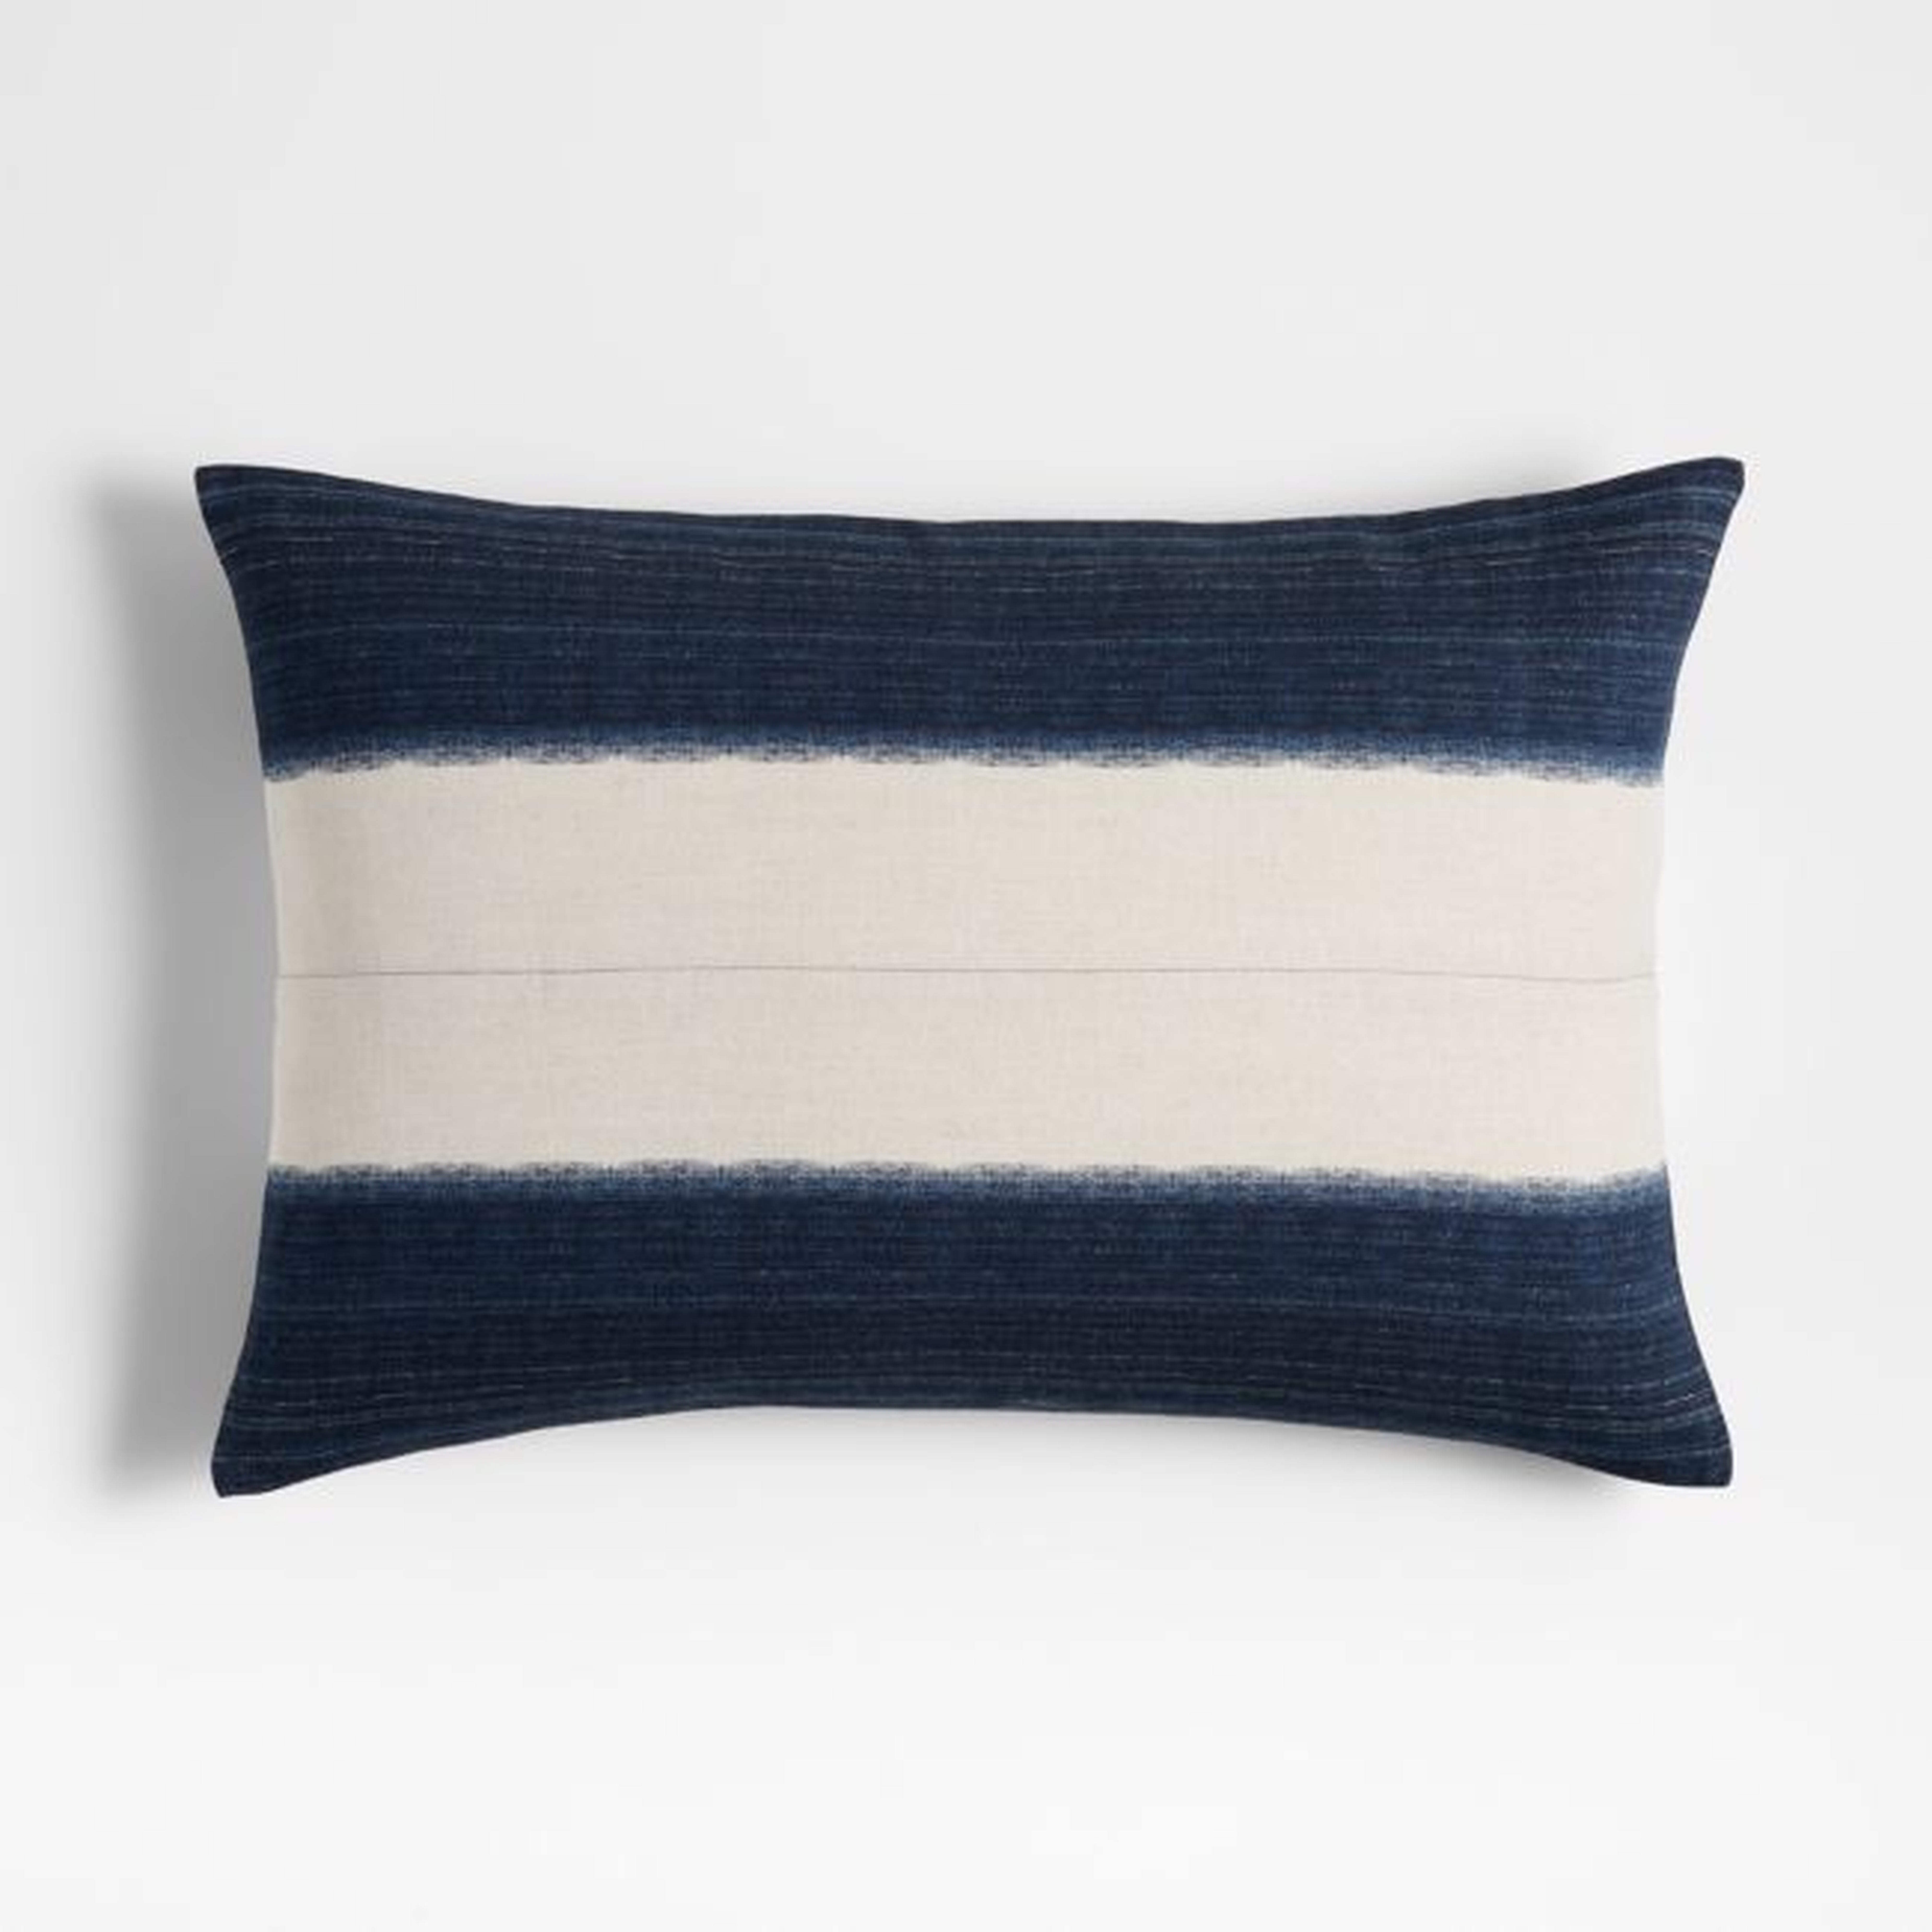 Littoral 22"x15" Two-Tone Navy Throw Pillow with Feather Insert - Crate and Barrel